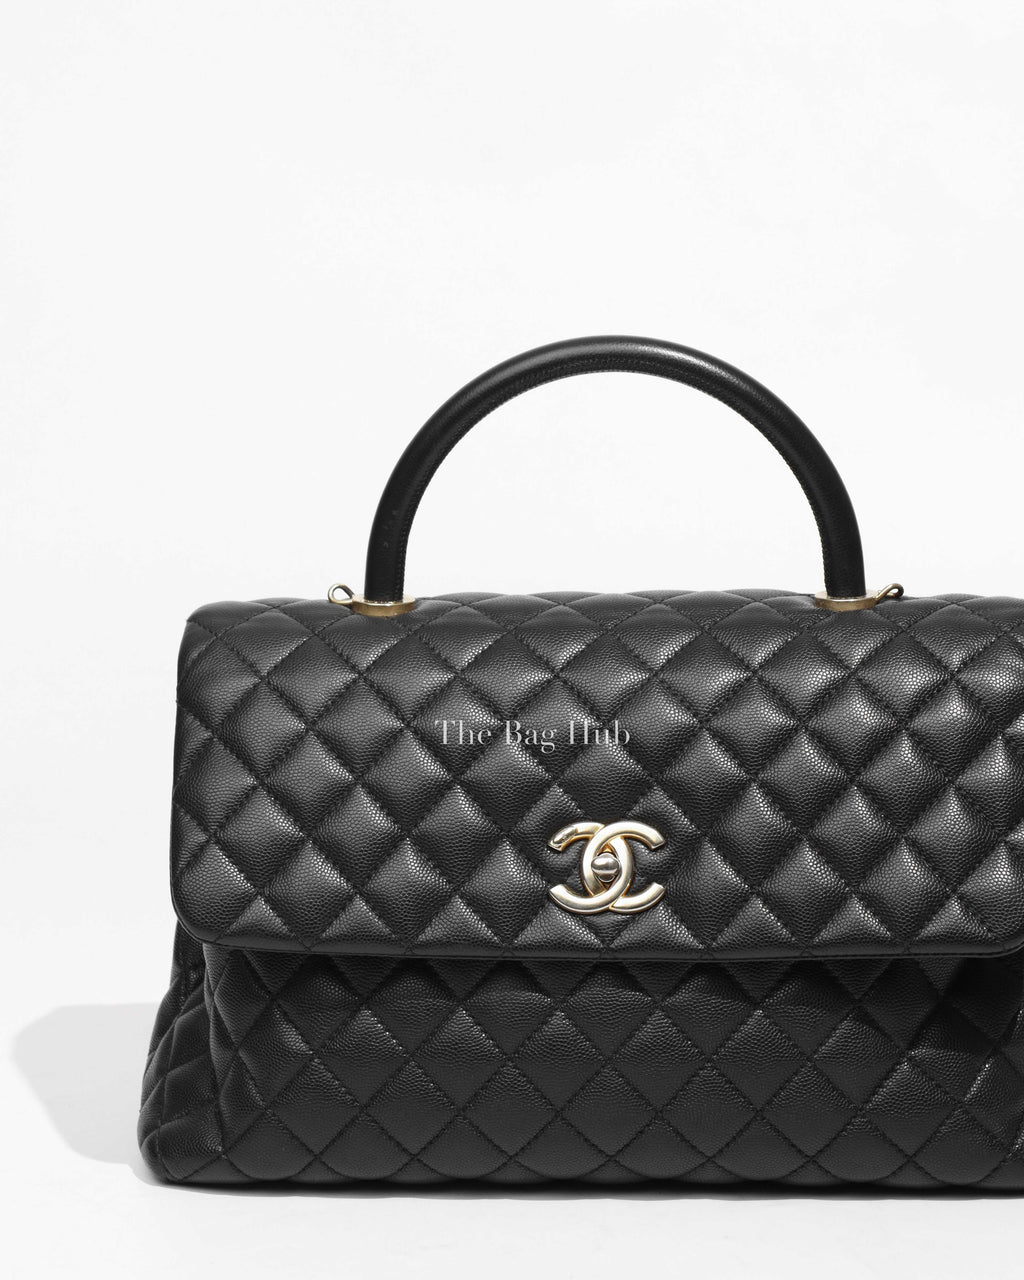 Chanel Black Caviar Leather Large Coco Handle Bag GHW